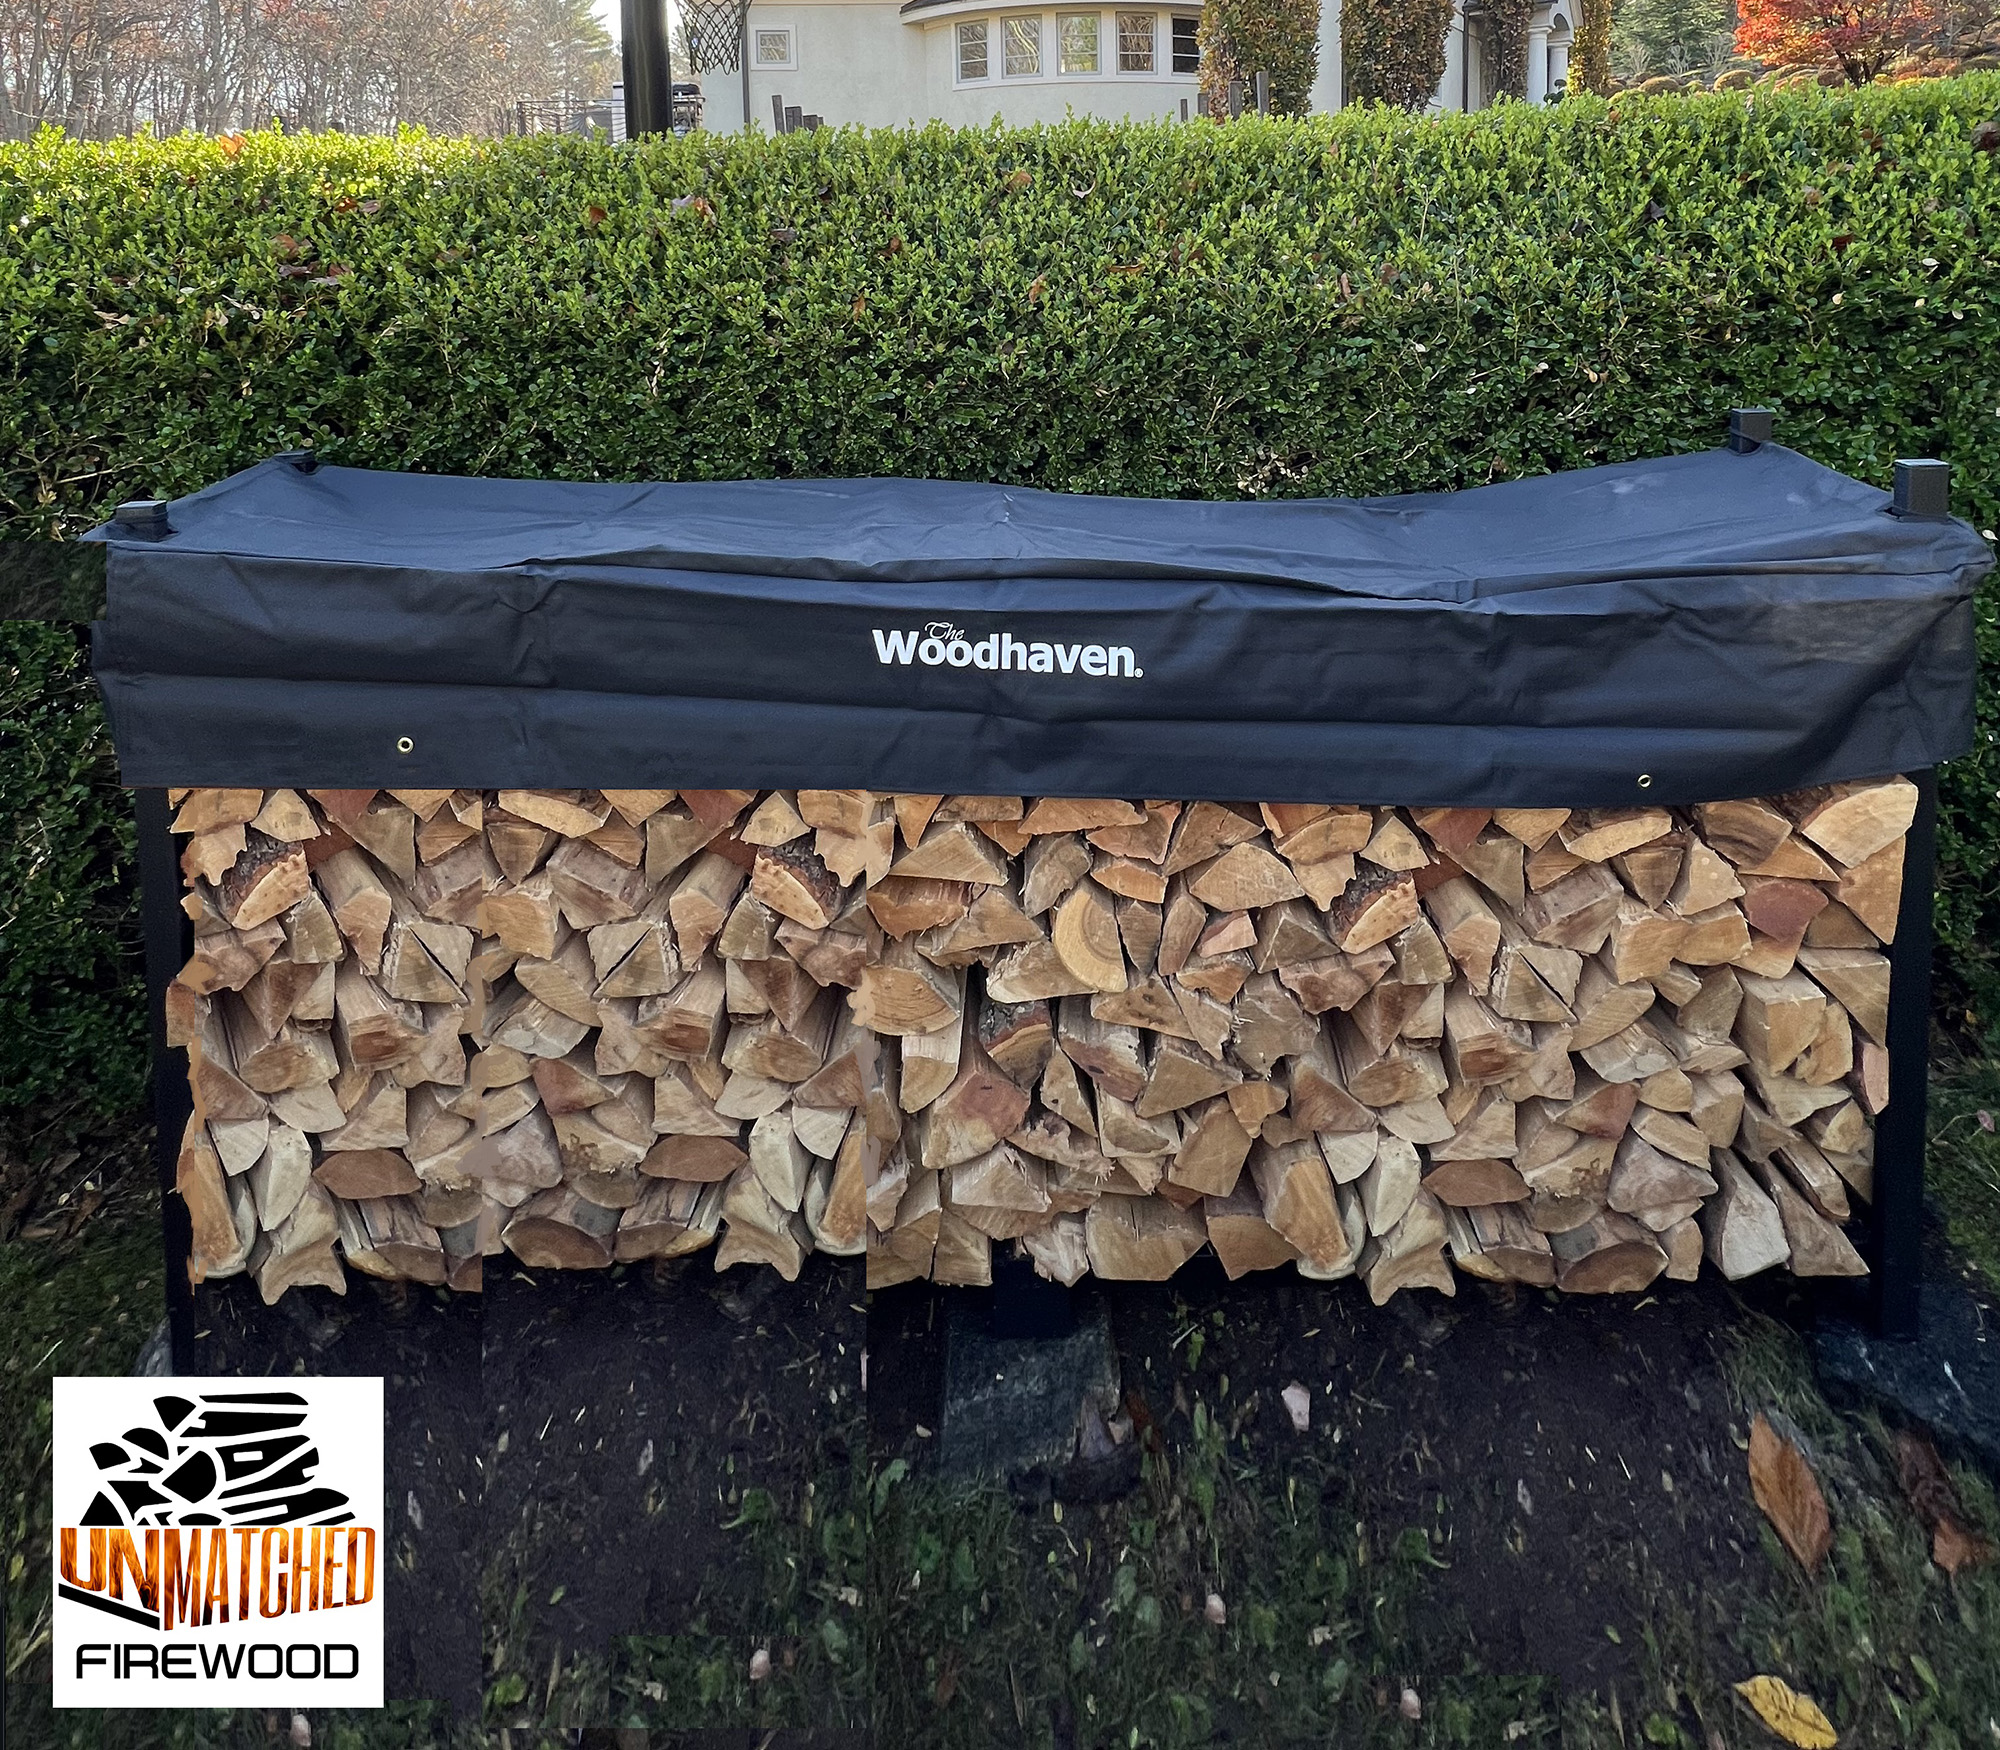 Unmatched Firewood: Purchase Firewood